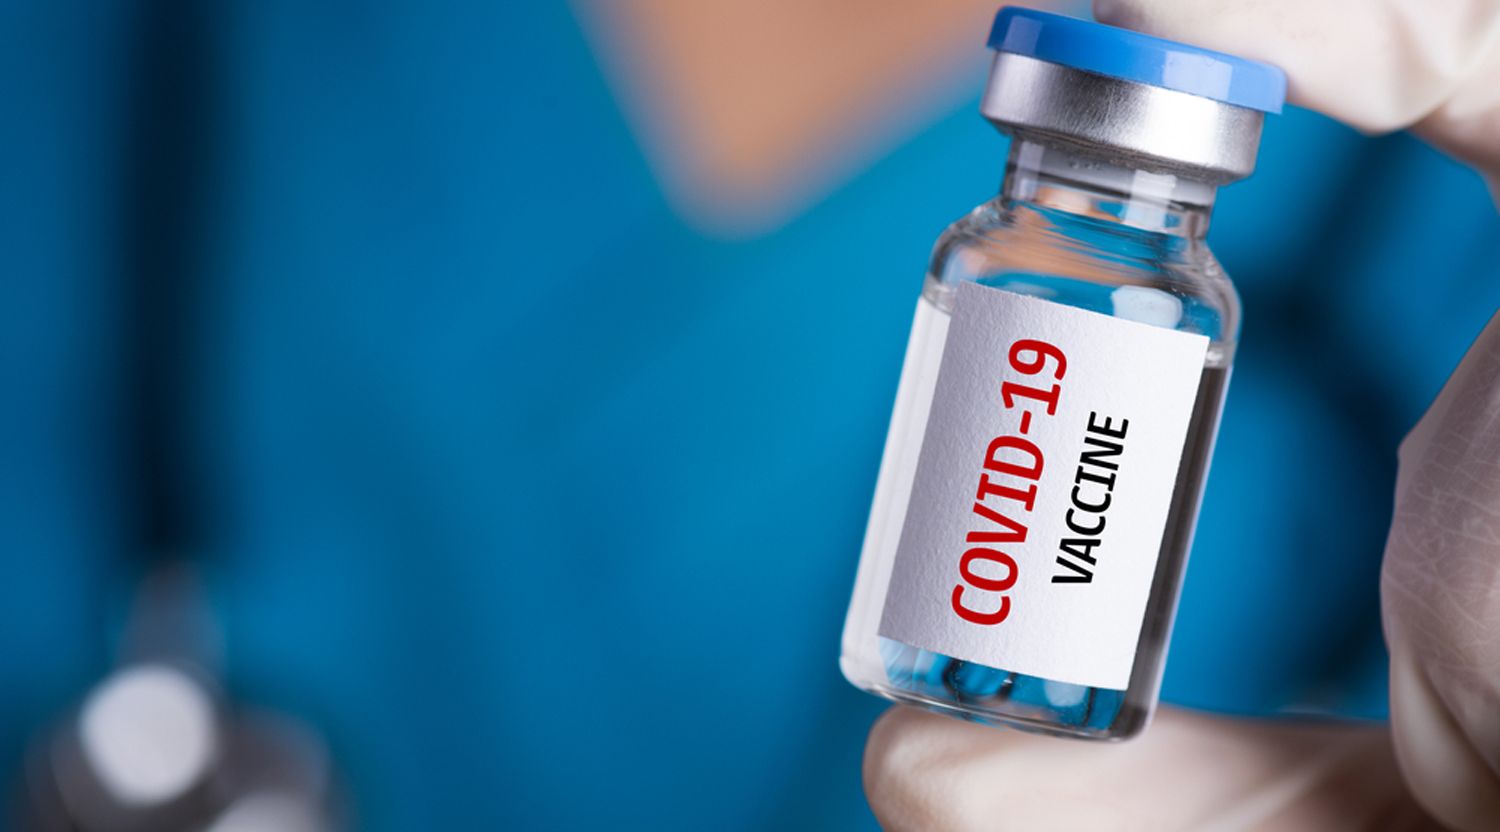 Dha Announced Availability Of Third Dose Of The Pfizer Biontech Covid 19 Vaccine For Eligible Categories